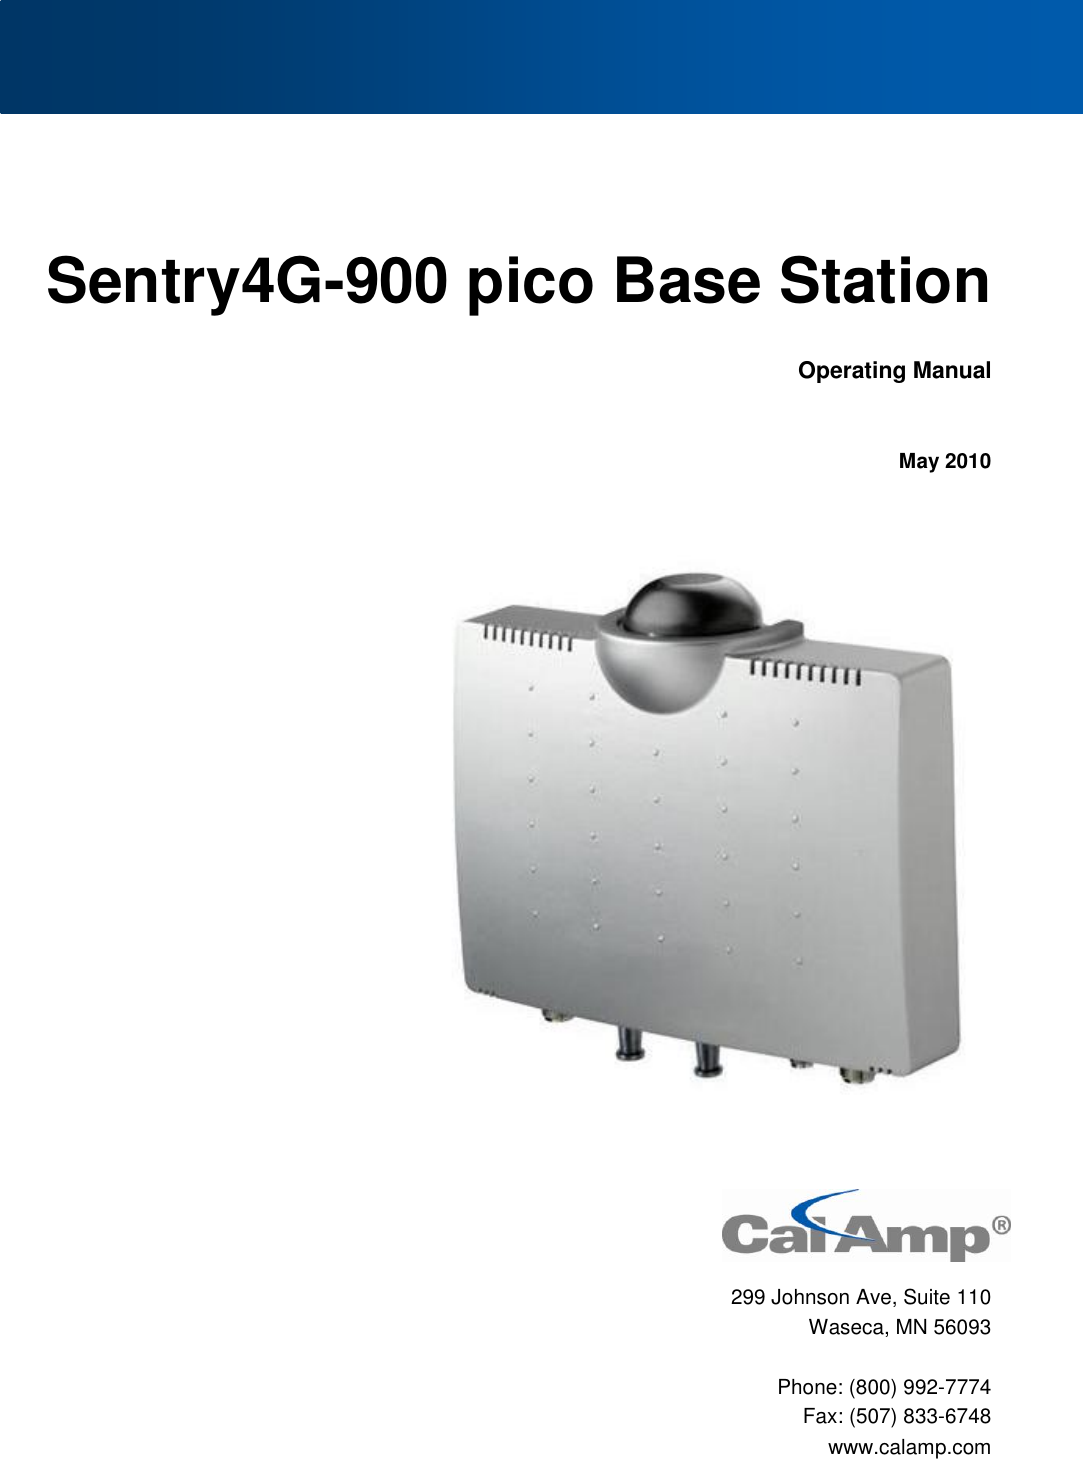                    Sentry4G-900 pico Base Station                                                                                              Operating Manual                                                                                                                                                                                                                                                                      May 2010                             299 Johnson Ave, Suite 110   Waseca, MN 56093     Phone: (800) 992-7774   Fax: (507) 833-6748   www.calamp.com